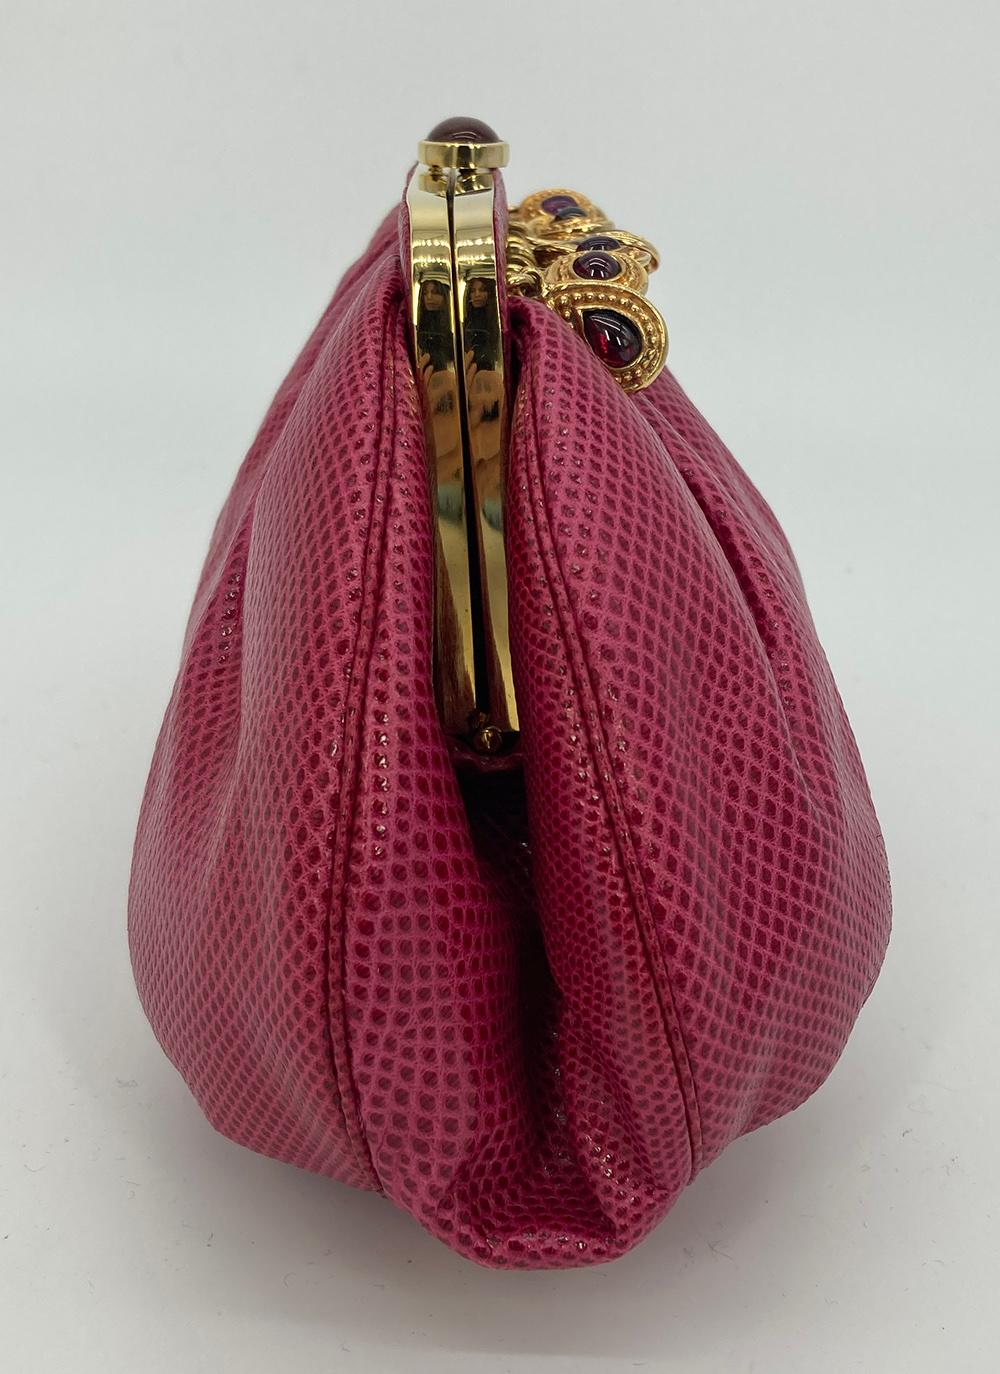 Vintage Judith Leiber Dark Pink Lizard Clutch c1980s in good condition. Dark rose lizard exterior trimmed with gold hardware and various gemstone charm embellishments along top front edge. Top button closure opens to a matching rose nylon interior